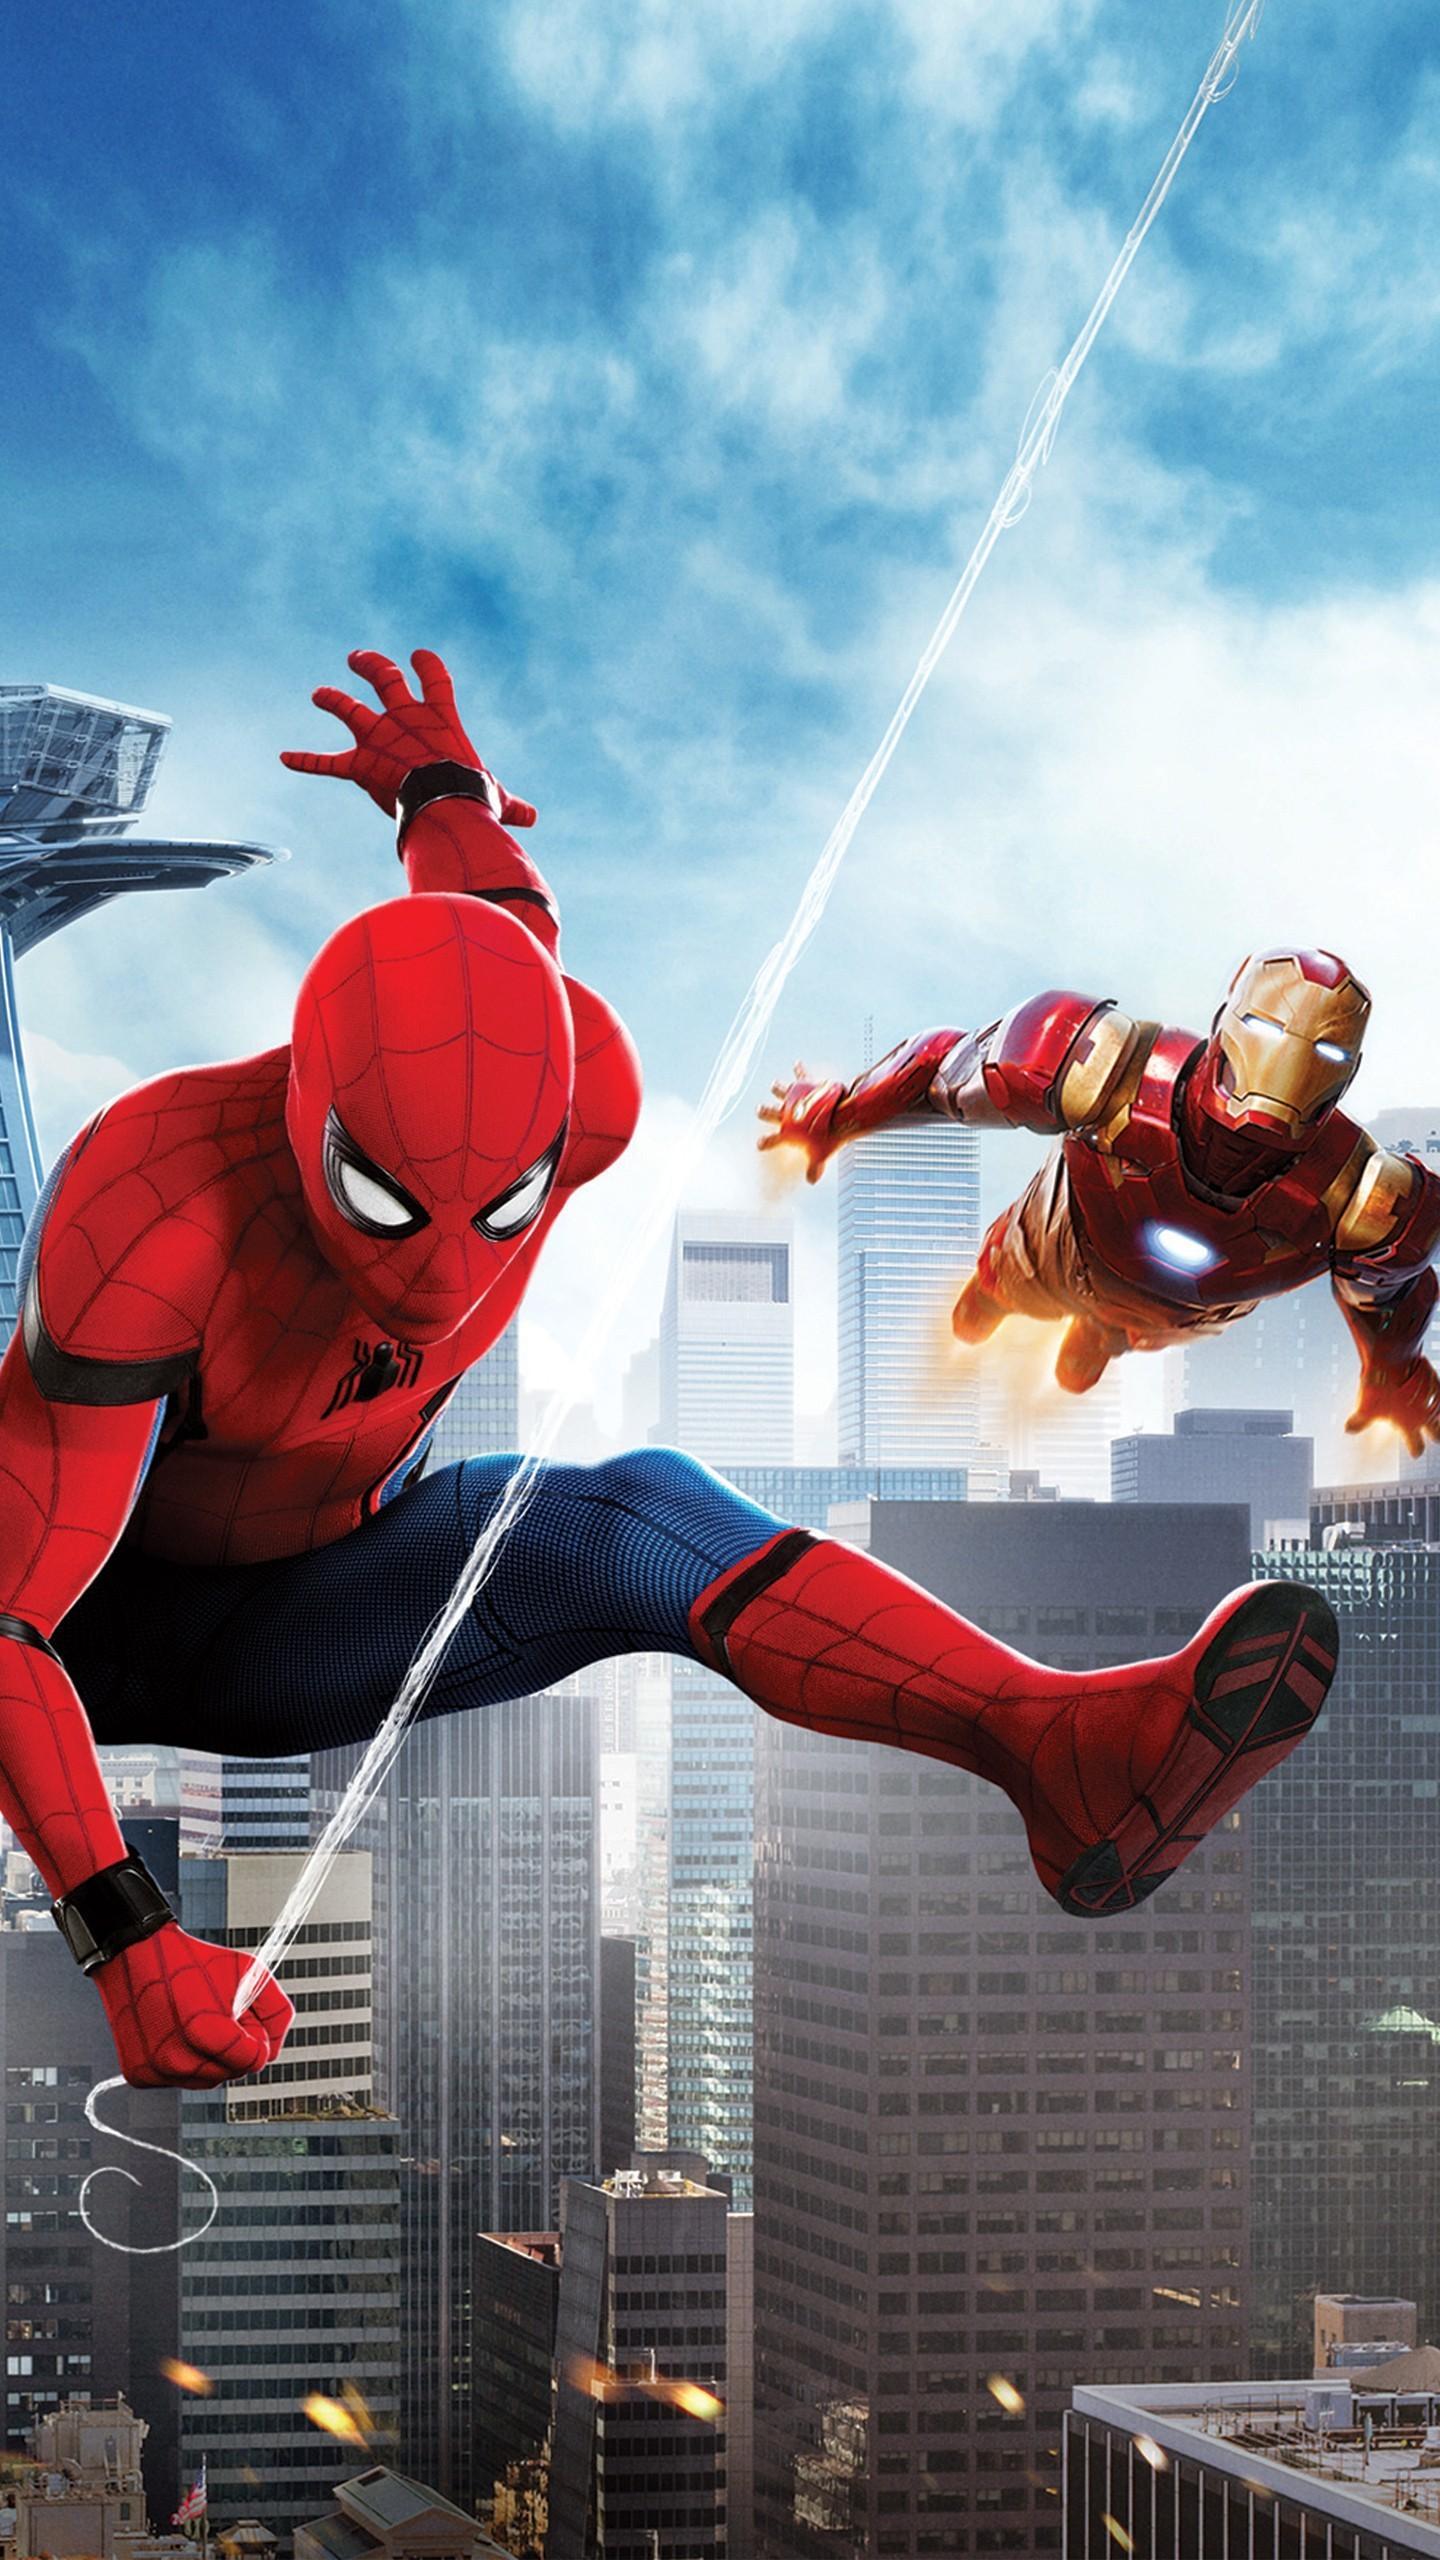 IRON MAN & SPIDER MAN IN HD COLOR STARK BUILDING IN THE BACKGROUND PHOTO PICTURE 